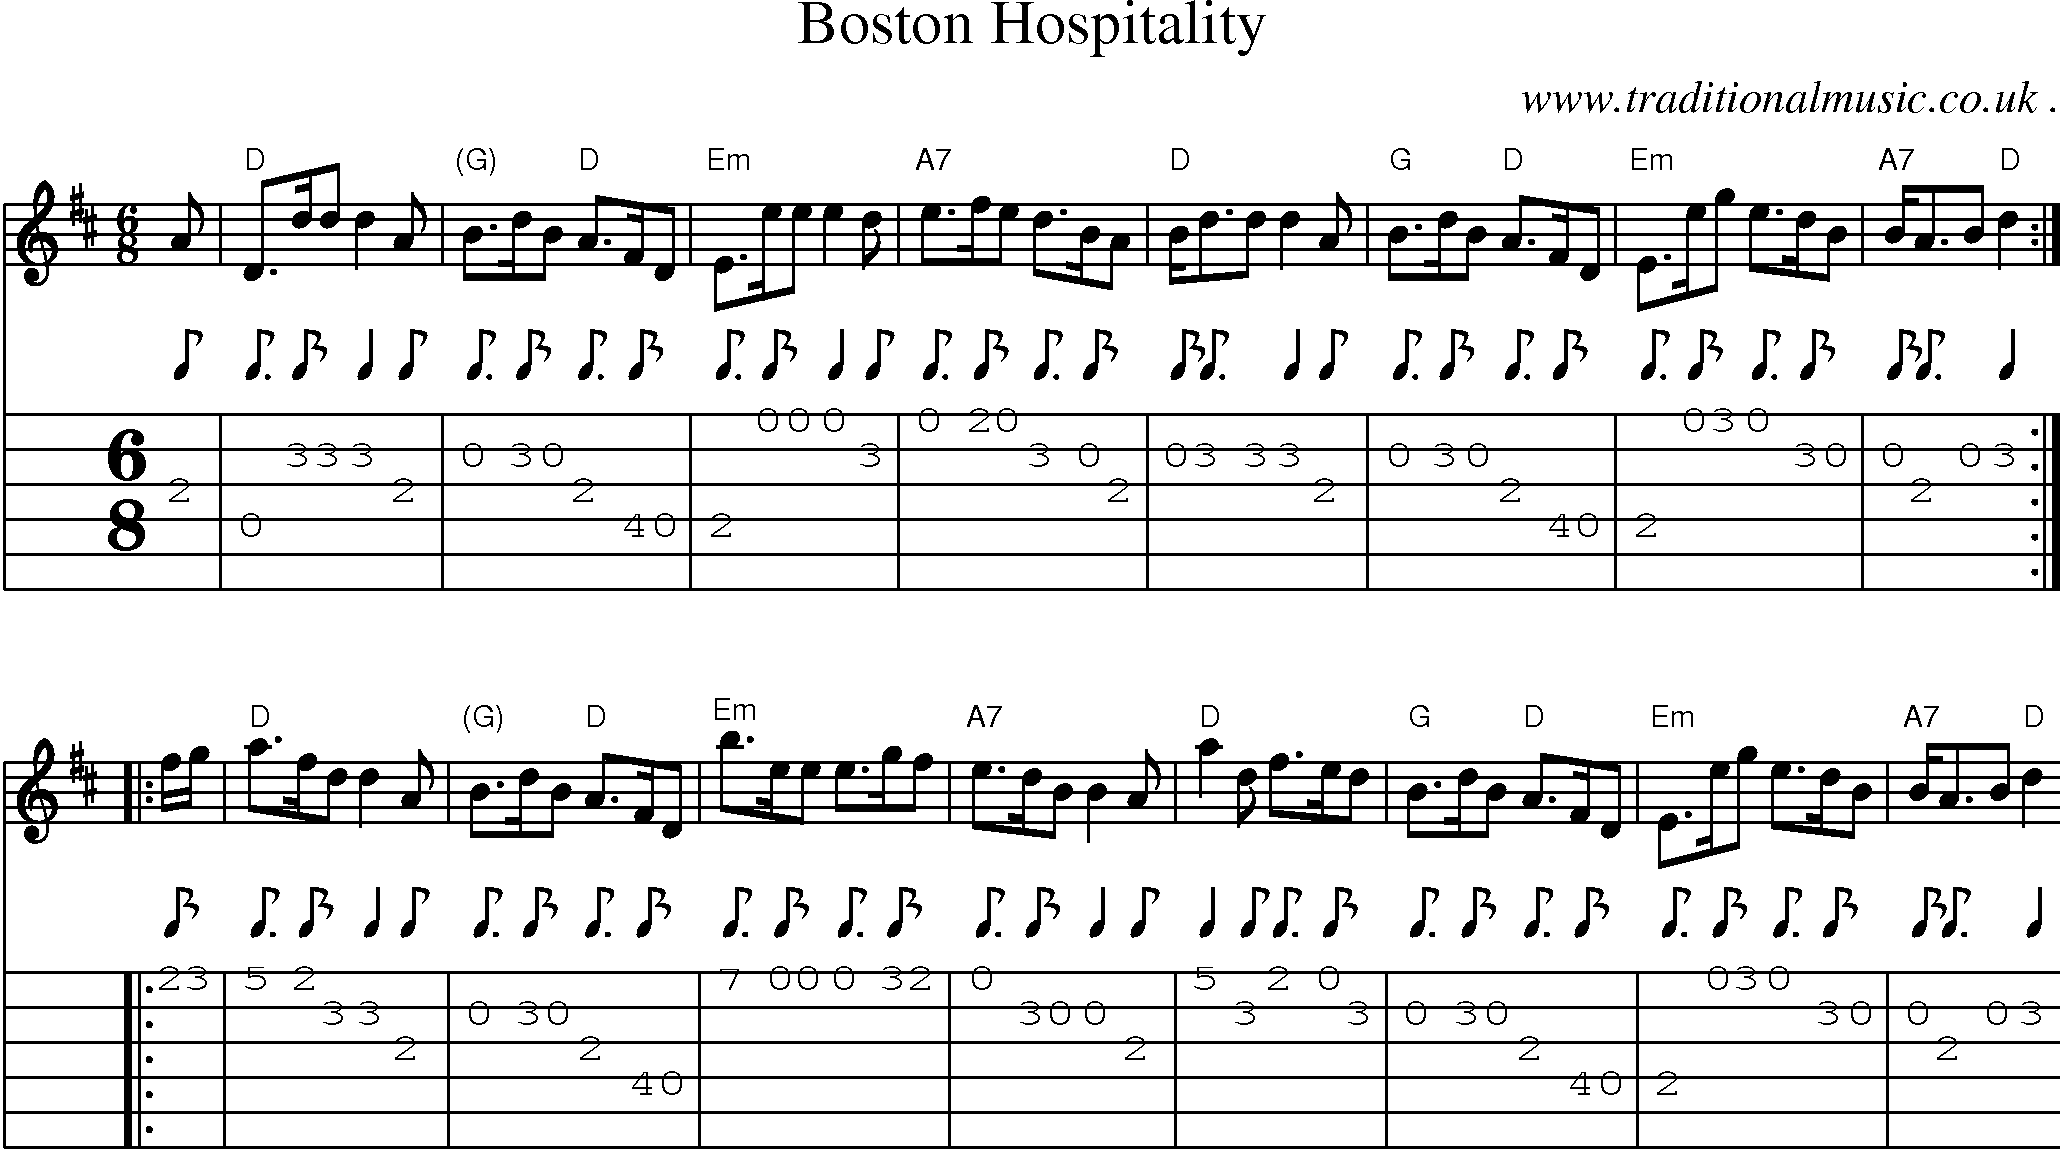 Sheet-music  score, Chords and Guitar Tabs for Boston Hospitality